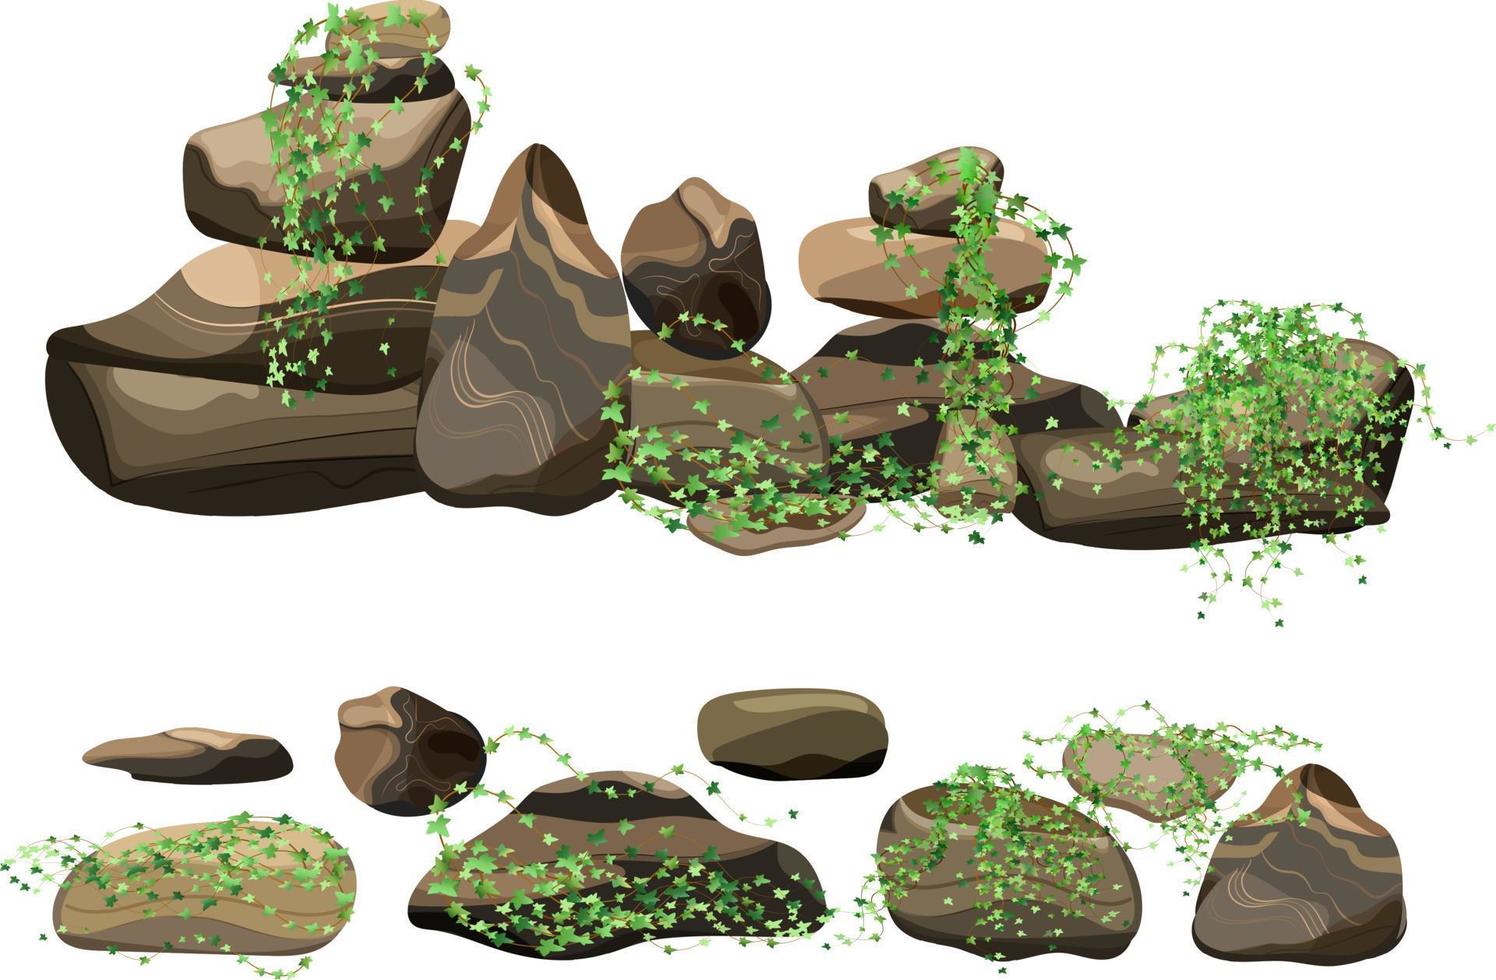 Collection of stones and plants of various shapes.Coastal pebbles,cobblestones,gravel,minerals and geological formations.Rock fragments,boulders and building material. vector